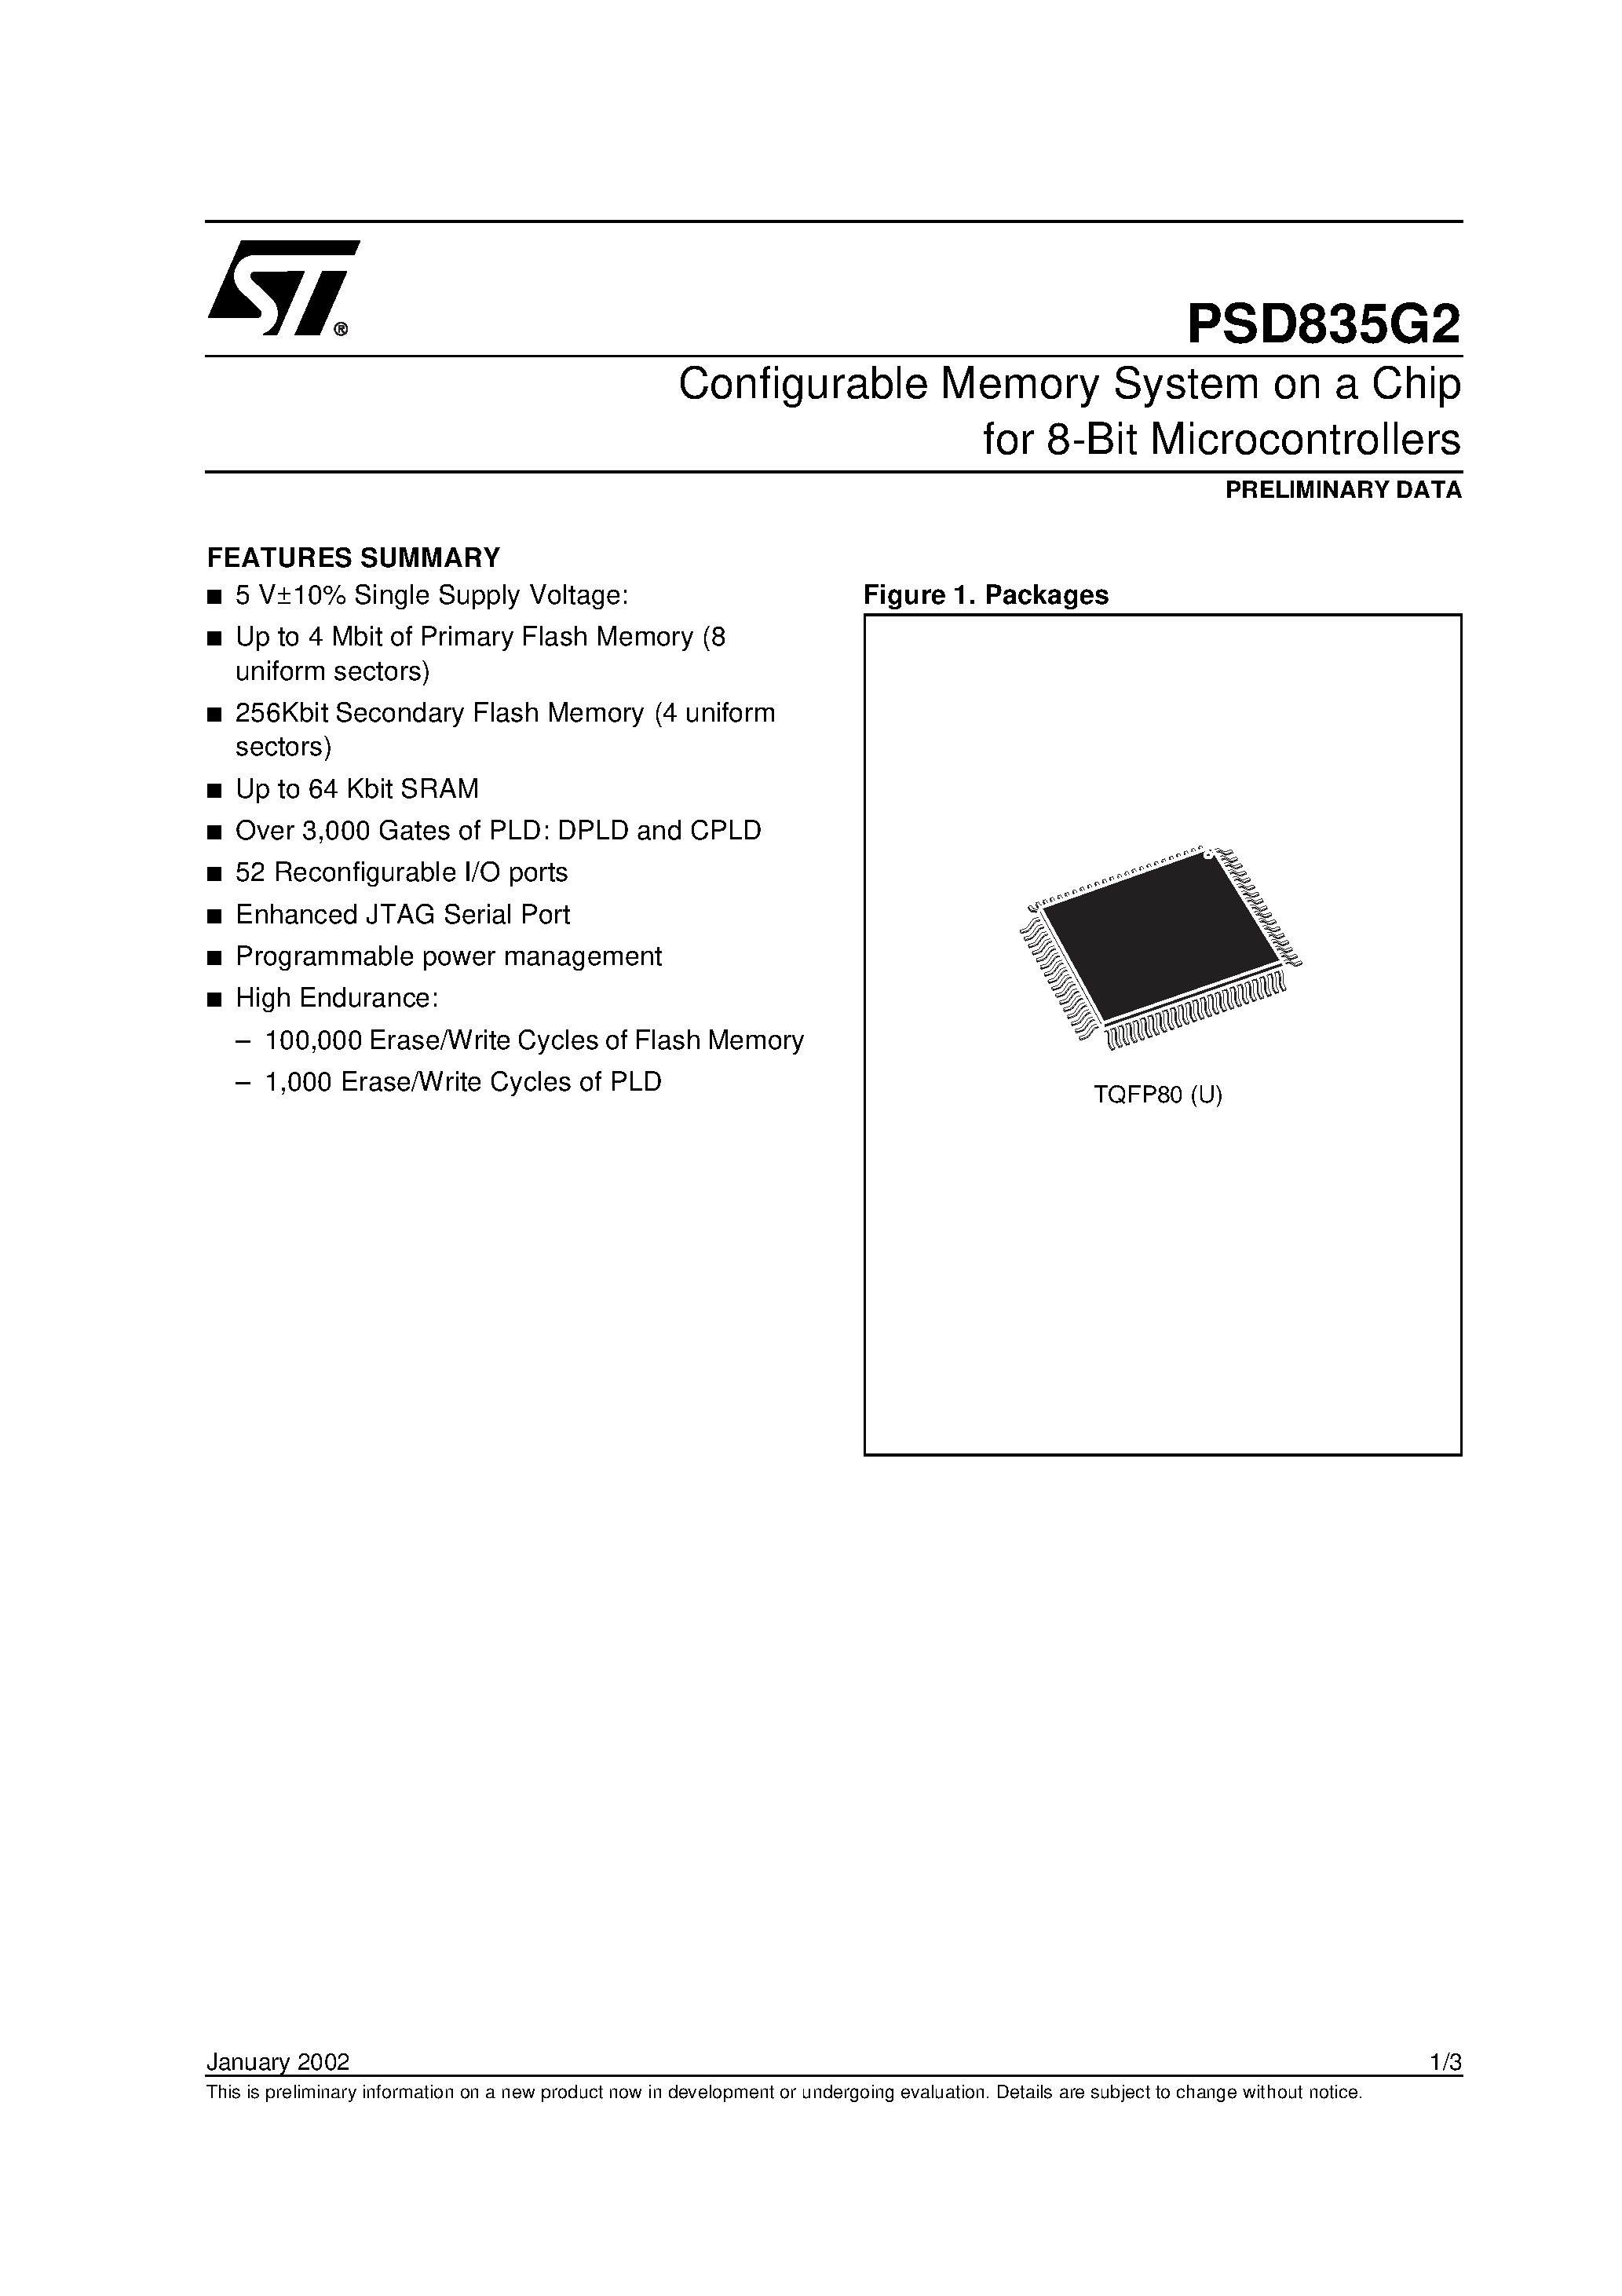 Datasheet PSD835F2V-A-20M - Configurable Memory System on a Chip for 8-Bit Microcontrollers page 1